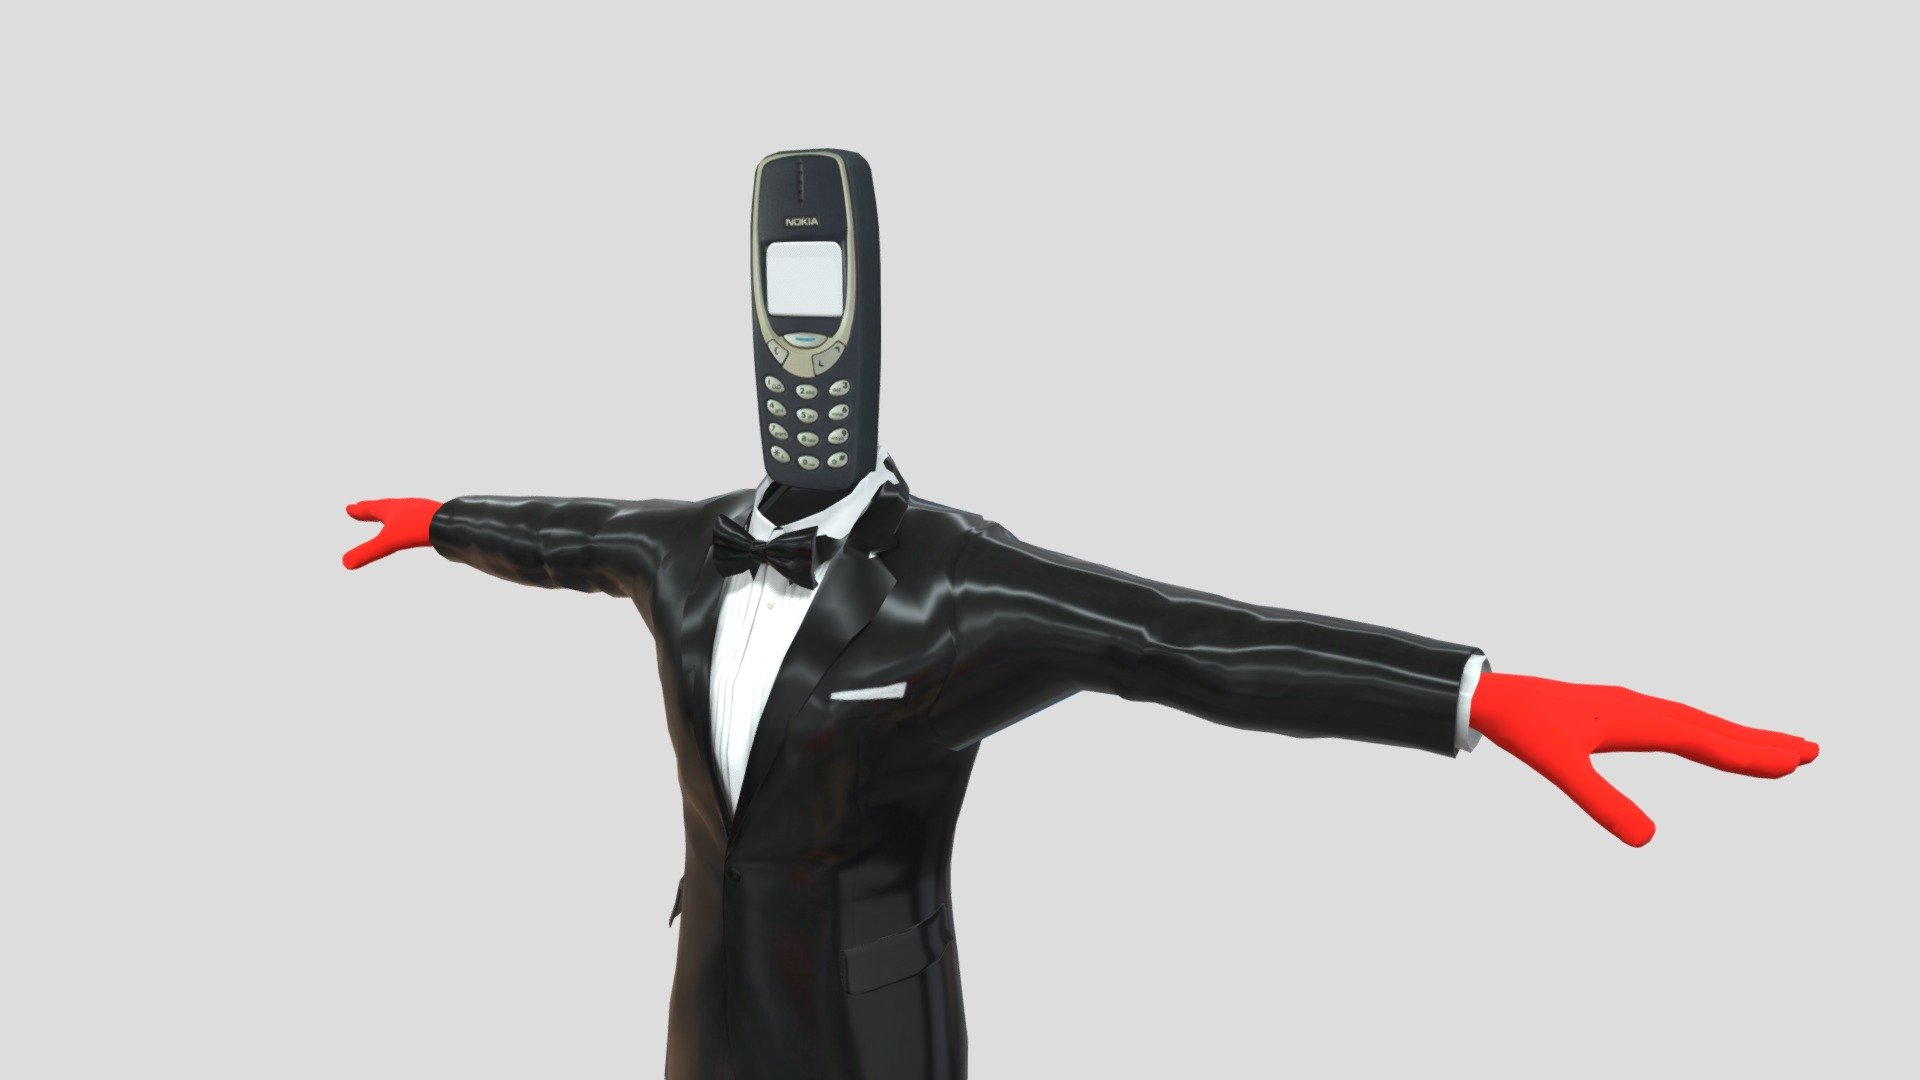 I made for you an analogue of Camera Man with a head in the form of a Nokia 3310 with a rig from mixamo. You can see what NokiaMan looks like with animation on my YouTube channel https://www.youtube.com/@GipsoCartoon

If you use my models in your videos, write a link to my account in the description 3d model